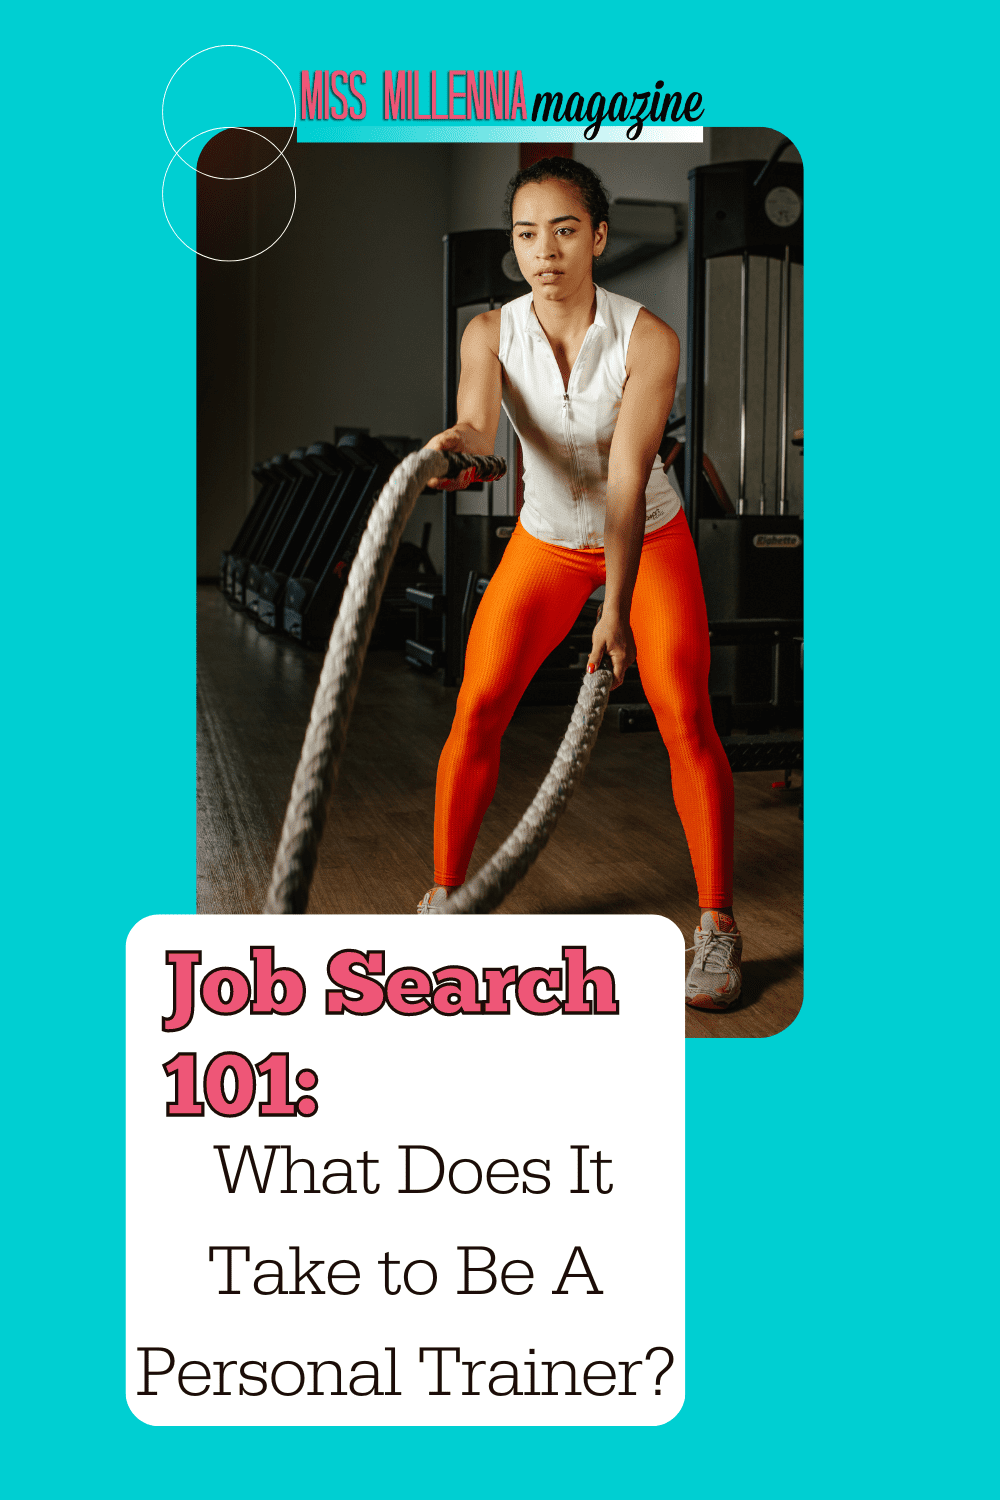 Job Search 101: What Does It Take to Be A Personal Trainer?